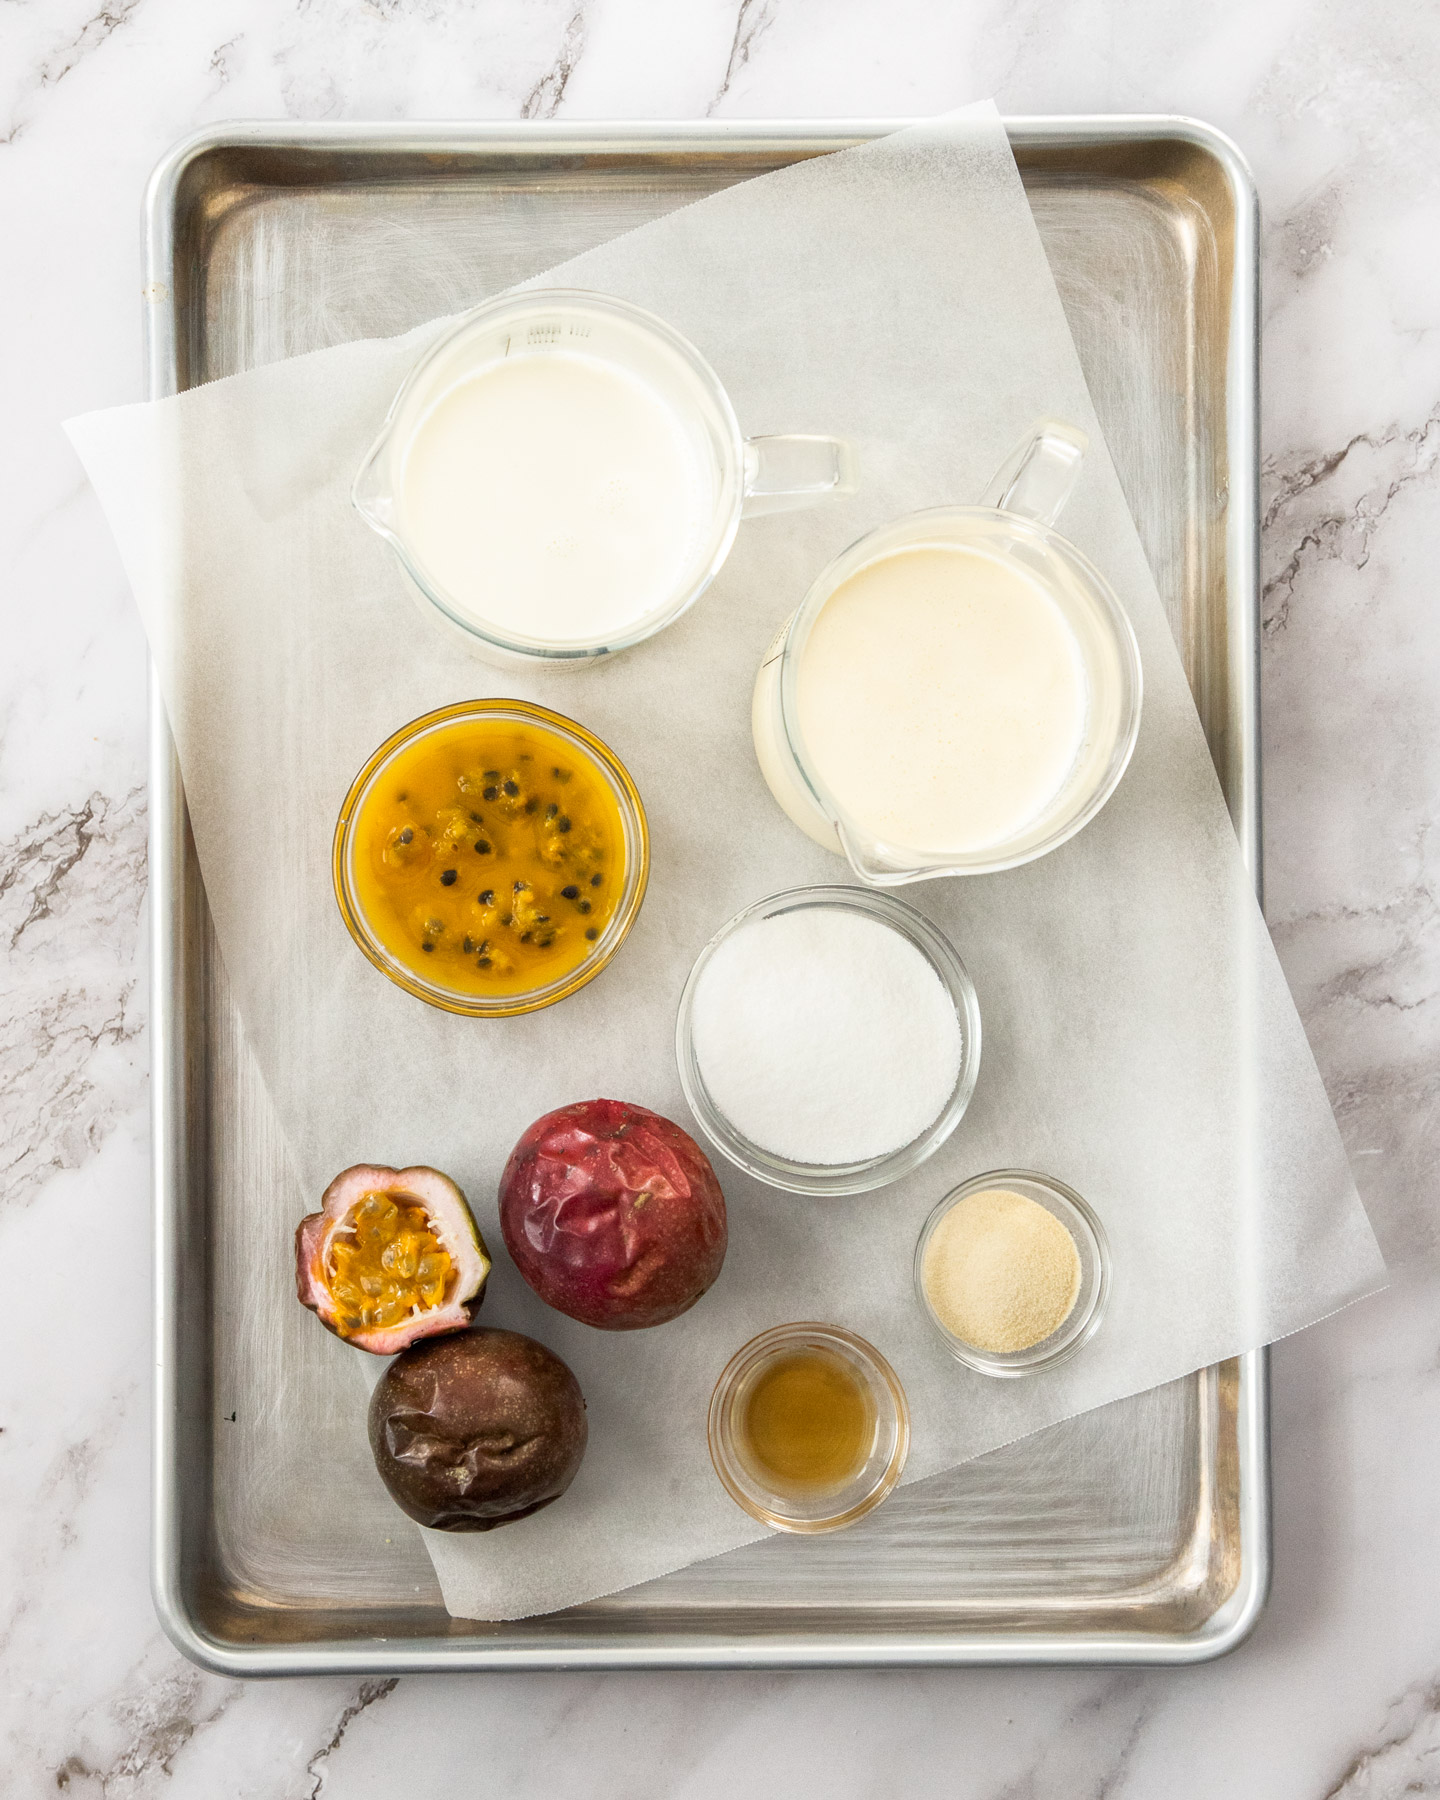 Ingredients for passionfruit panna cotta on a baking tray.